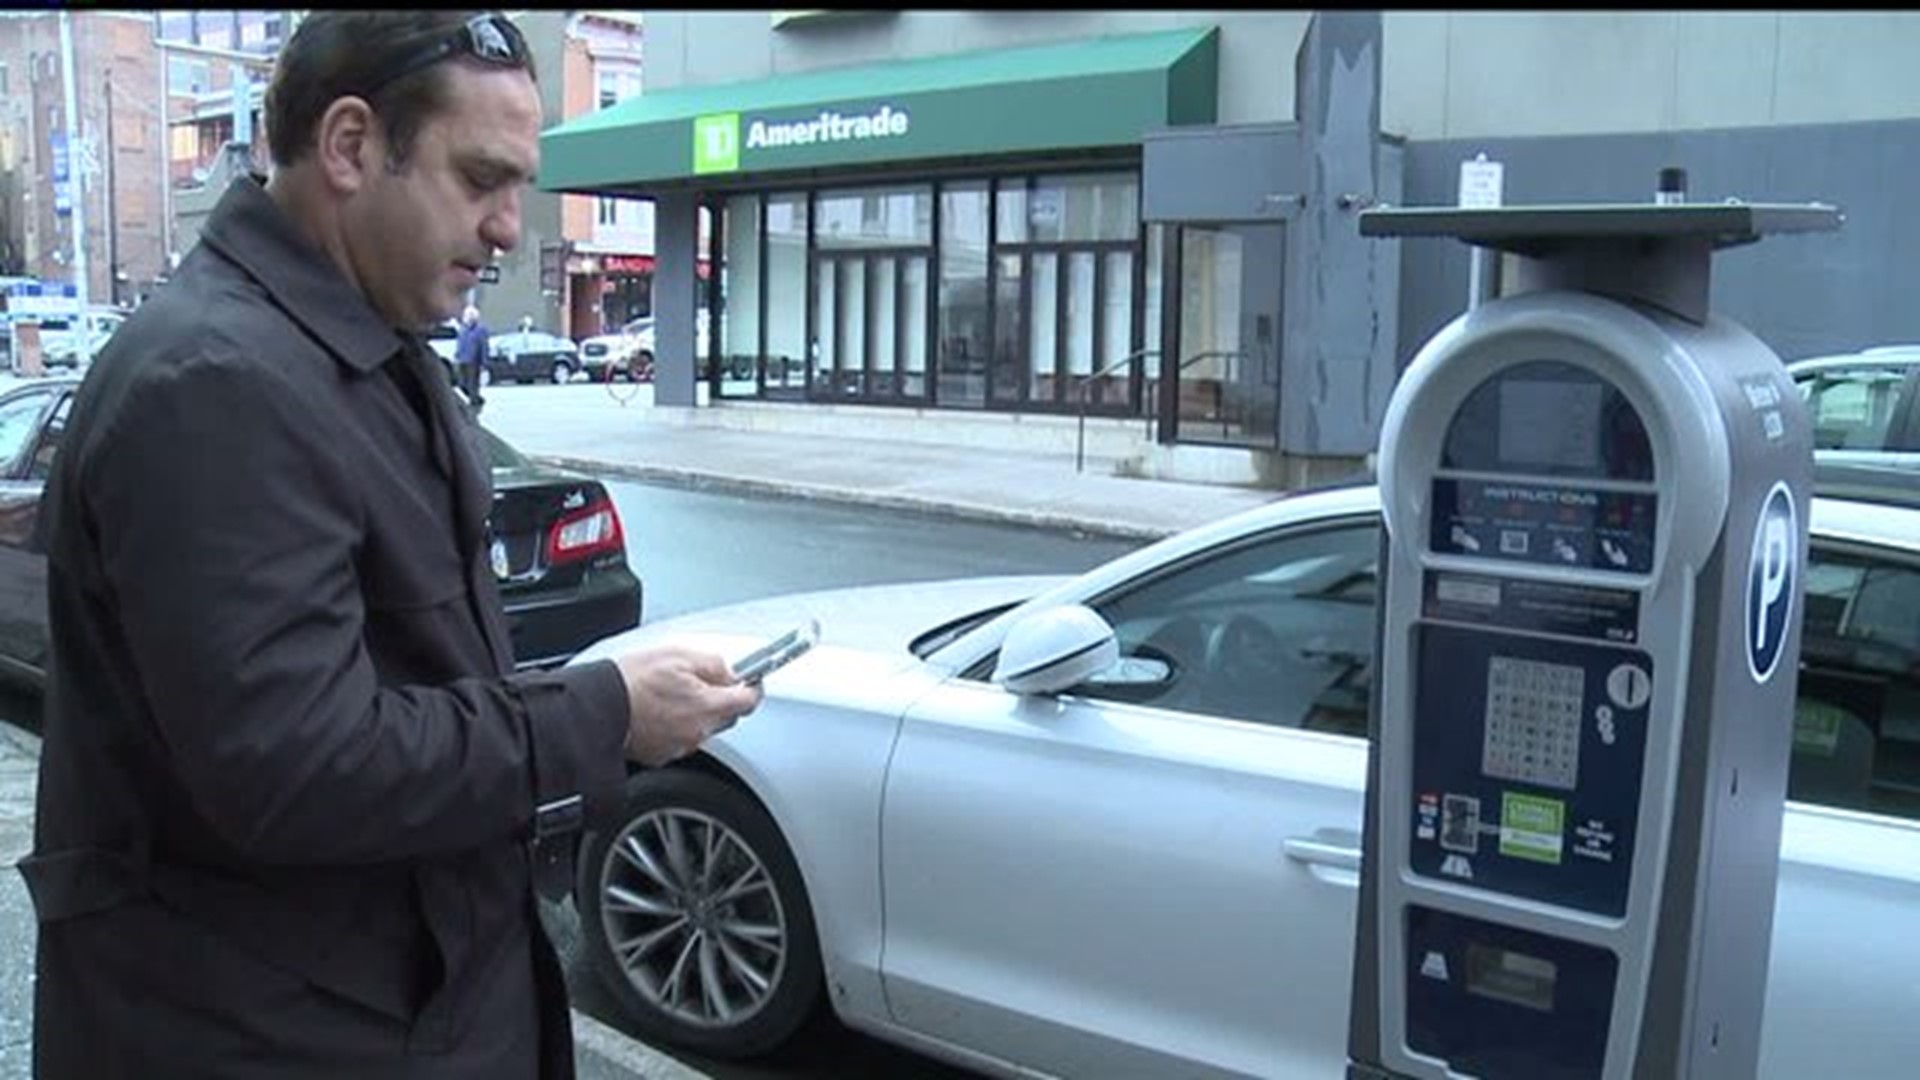 Harrisburg Mayor Papenfuse announces new mobile parking service